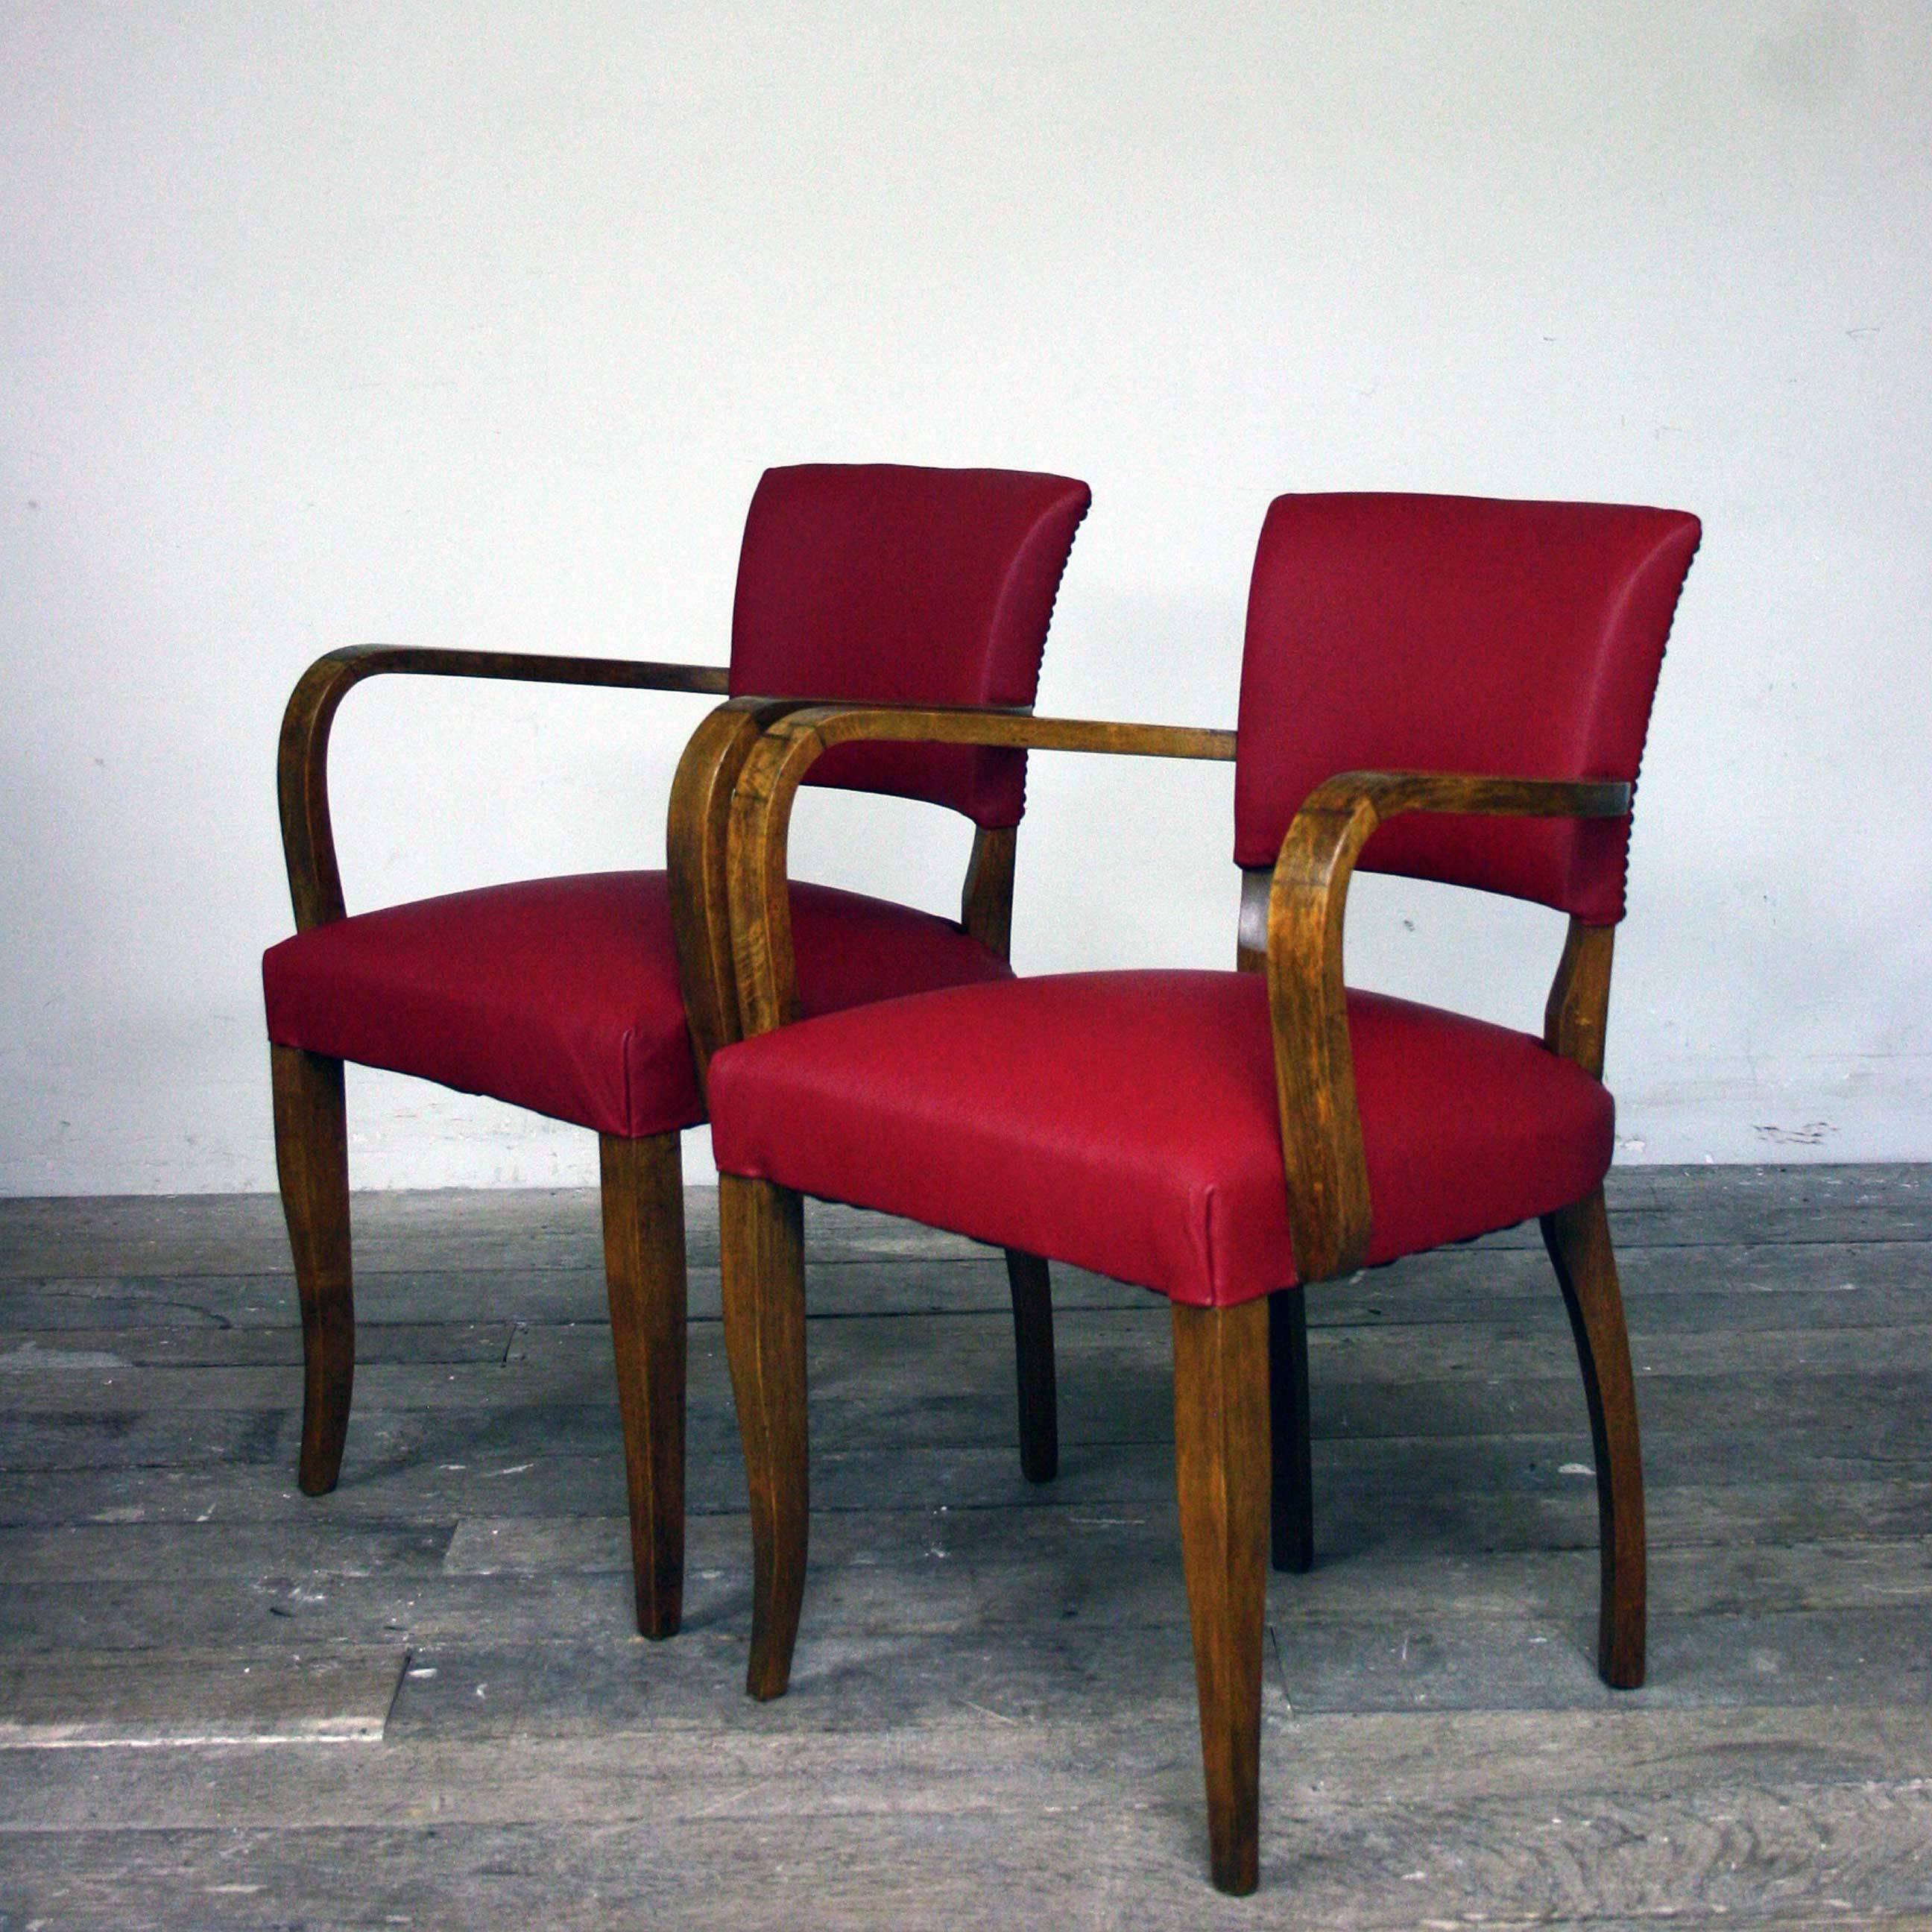 1930s reupholstered red leather bridge chairs.

Unfortunately I could not save the original leather, but this red leather really makes an impact and will age nicely with time.

Additional dimensions: Armrest height 67cm
 Seat height 47cm.